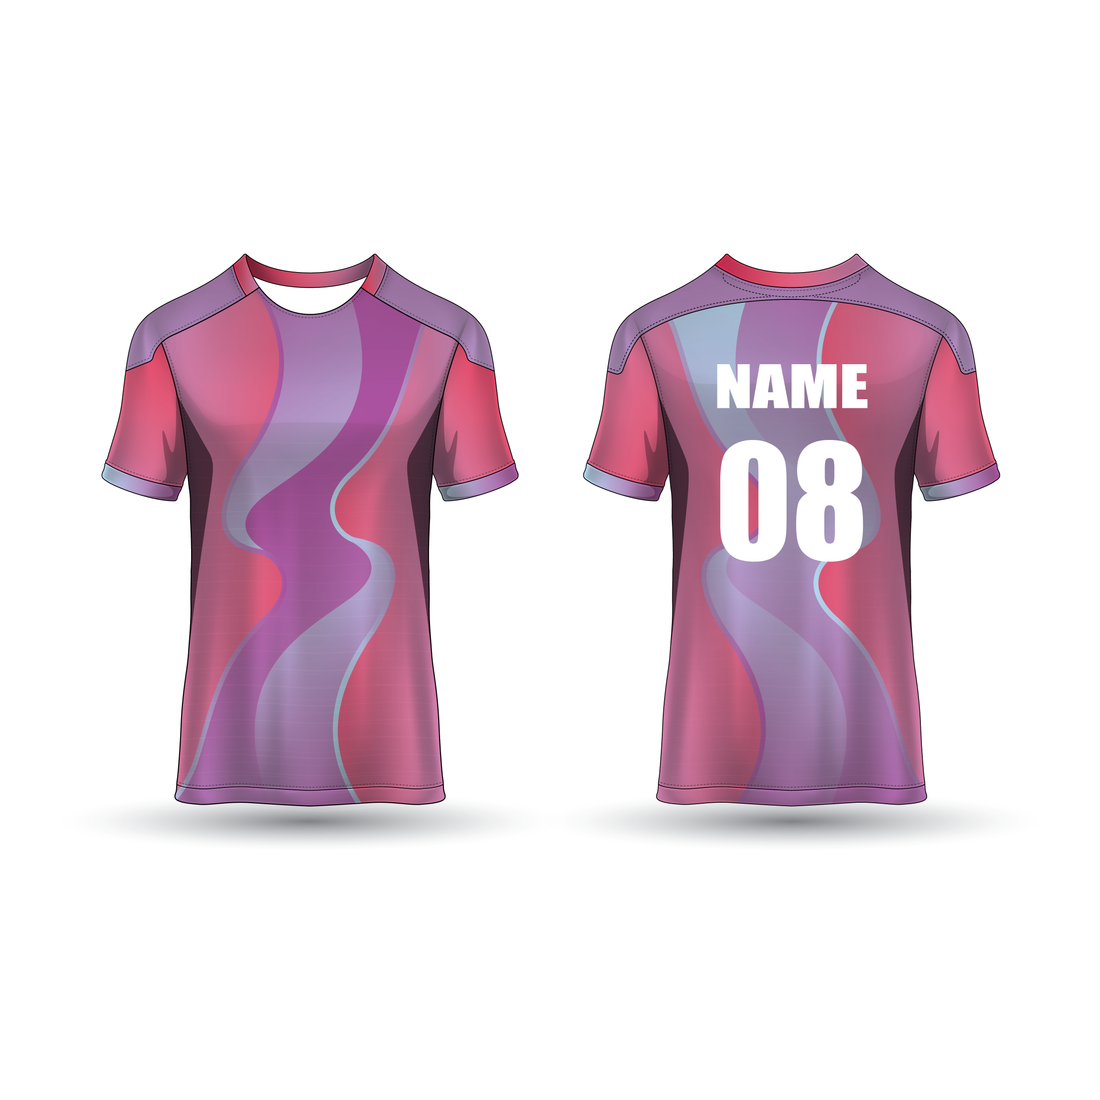 NEXT PRINT All Over Printed Customized Sublimation T-Shirt Unisex Sports Jersey Player Name & Number, Team Name NP50000257